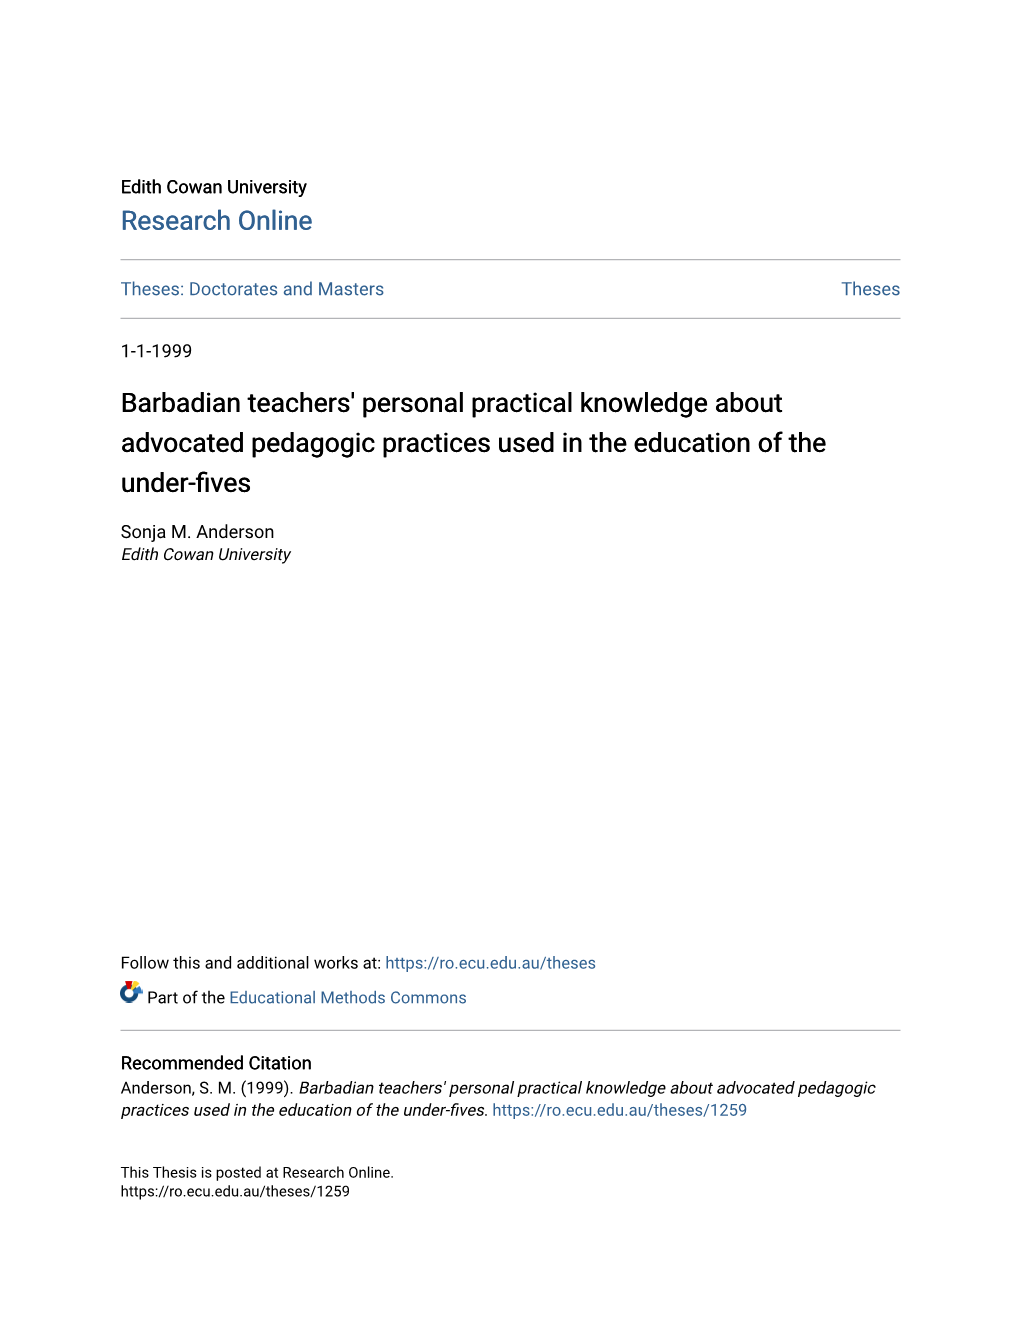 Barbadian Teachers' Personal Practical Knowledge About Advocated Pedagogic Practices Used in the Education of the Under-Fives